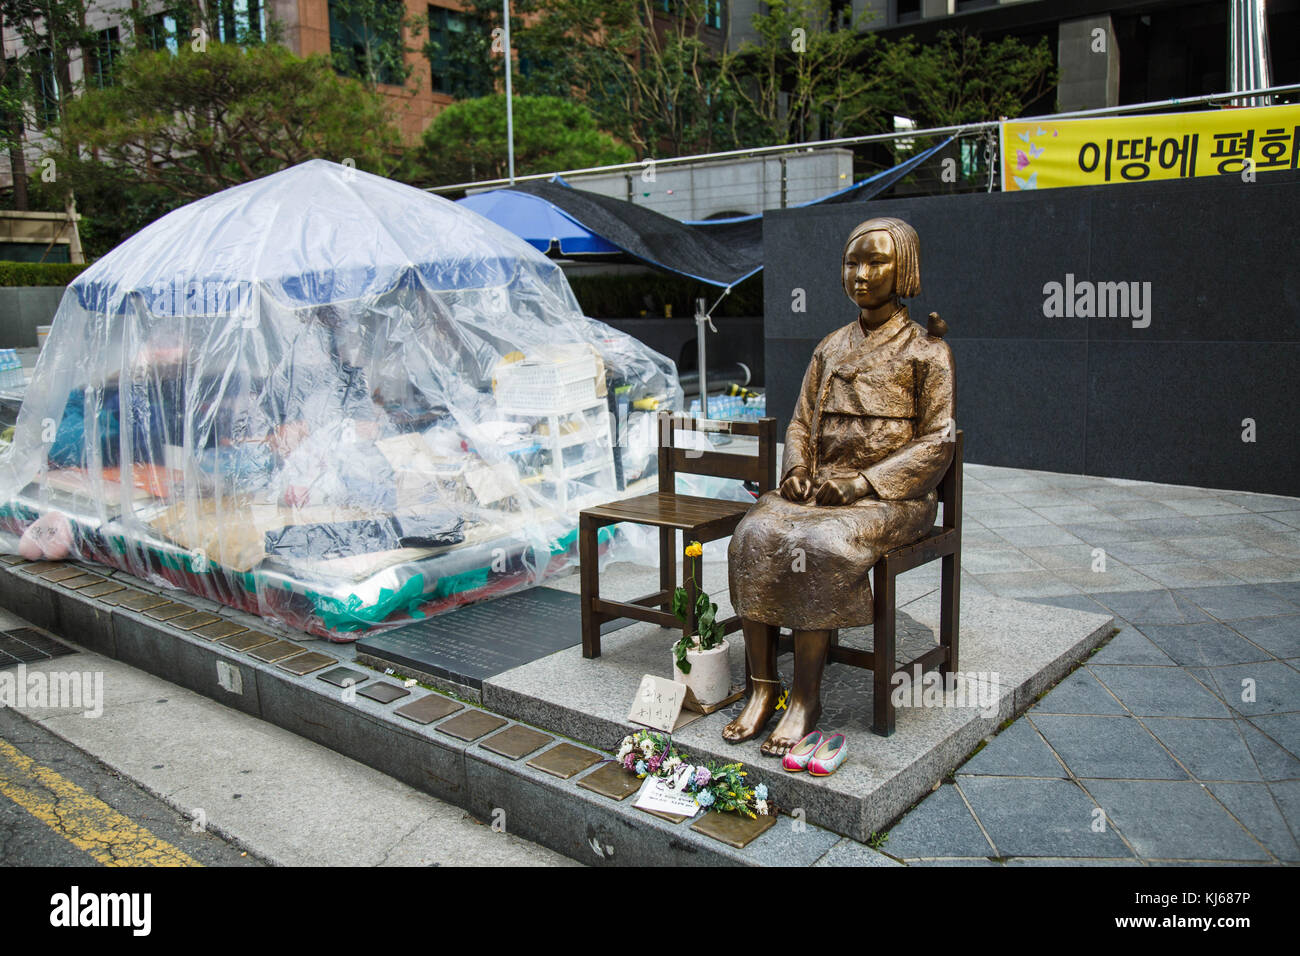 The avtivists protest beside the Statue of Peace (in Japan, called the comfort woman statue) across from the Japanese Embassy in Seoul, South Korea. Stock Photo